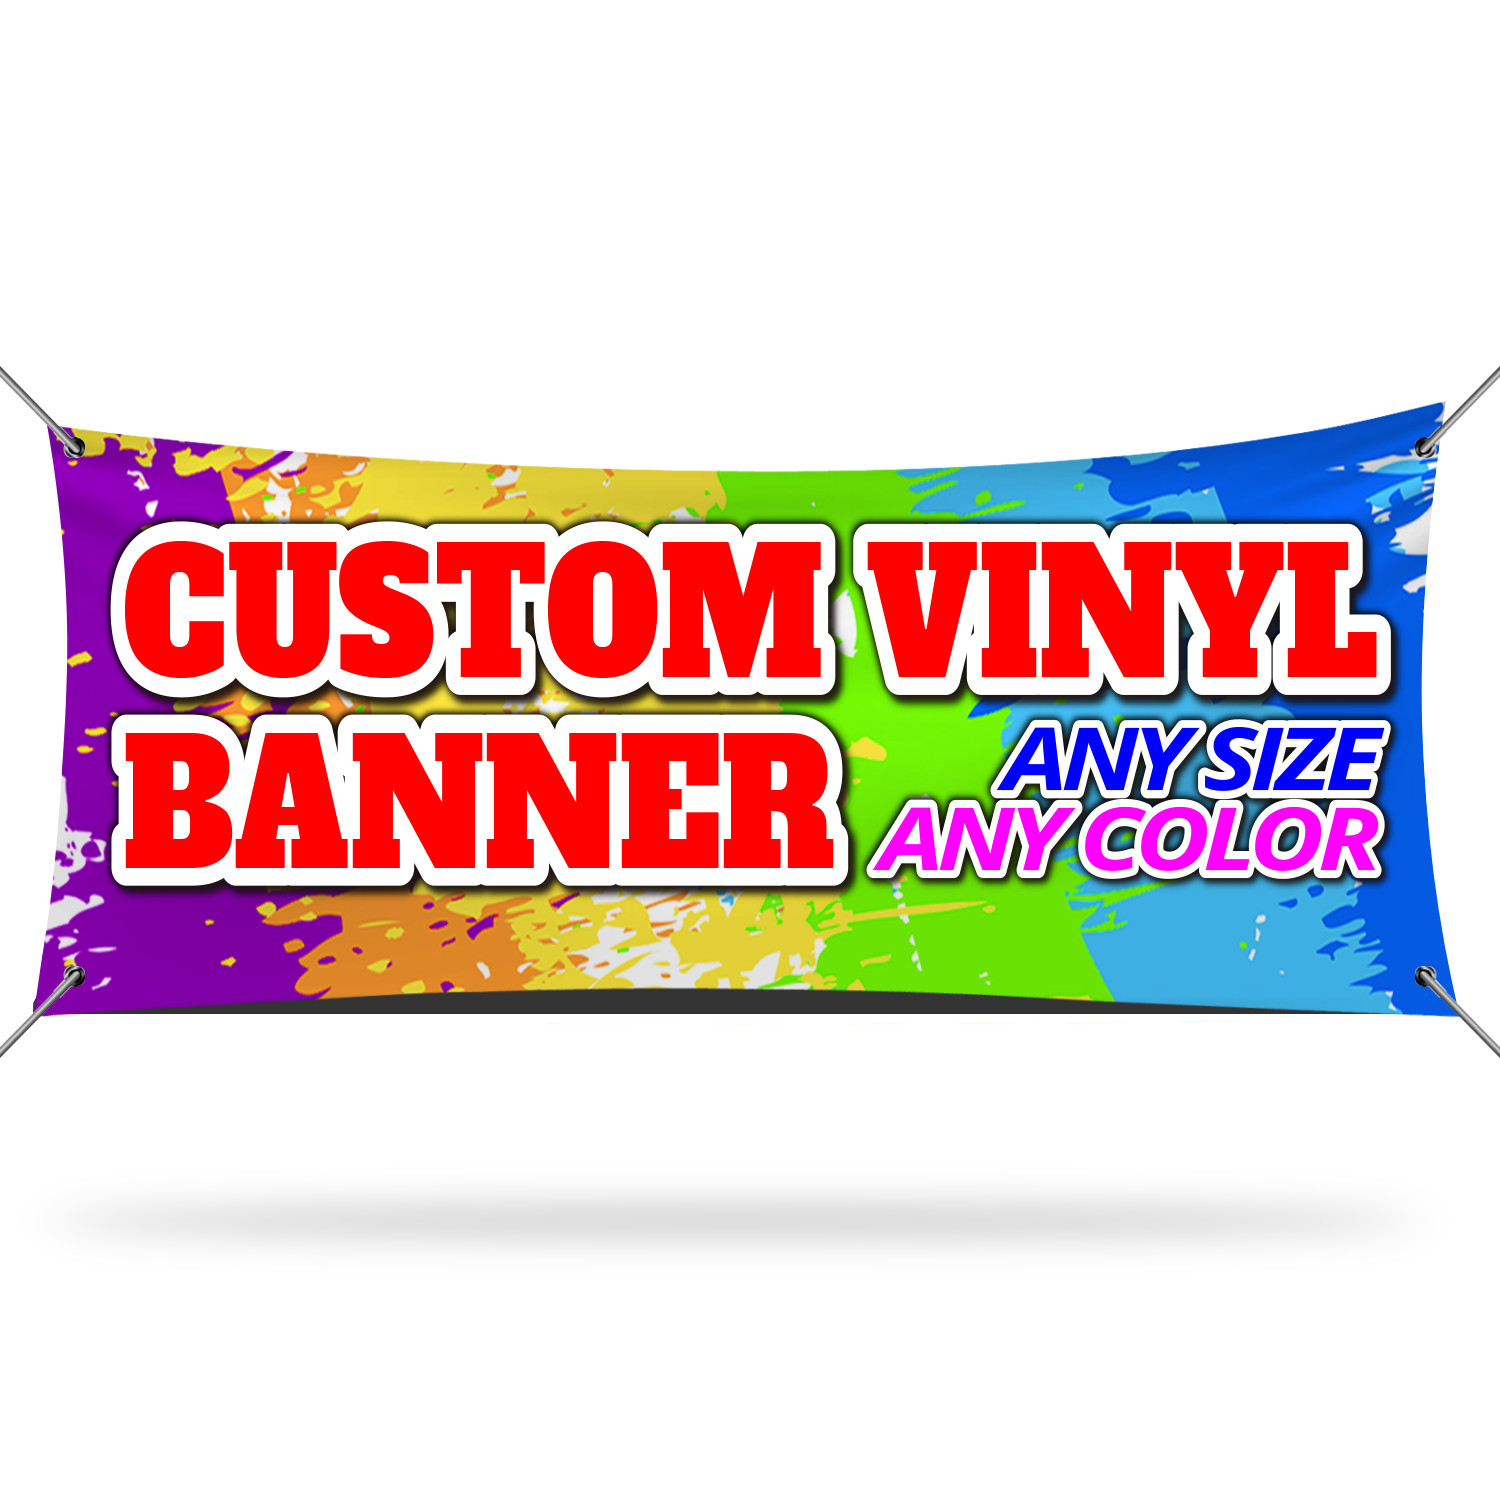 One Banner Vinyl Banner Sign Pre School #1 Style A Education Pre Marketing Advertising Yellow 8 Grommets 44inx110in Multiple Sizes Available 